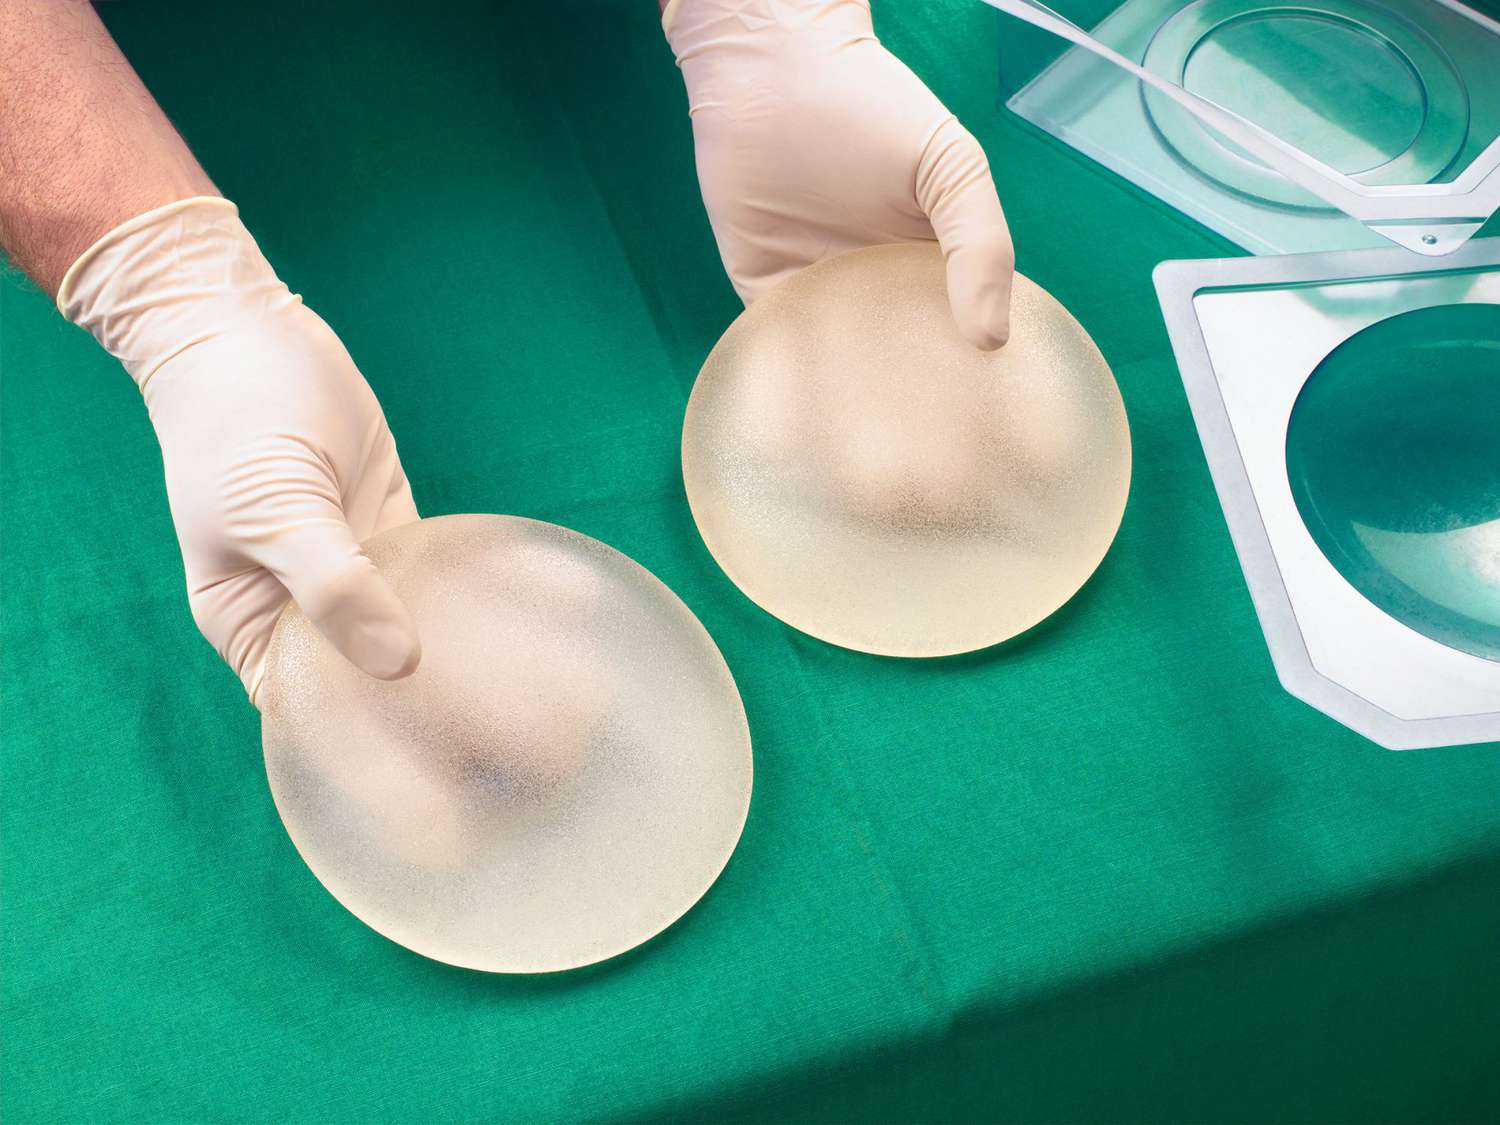 Surgeon holding silicone breast implants, close-up, elevated view